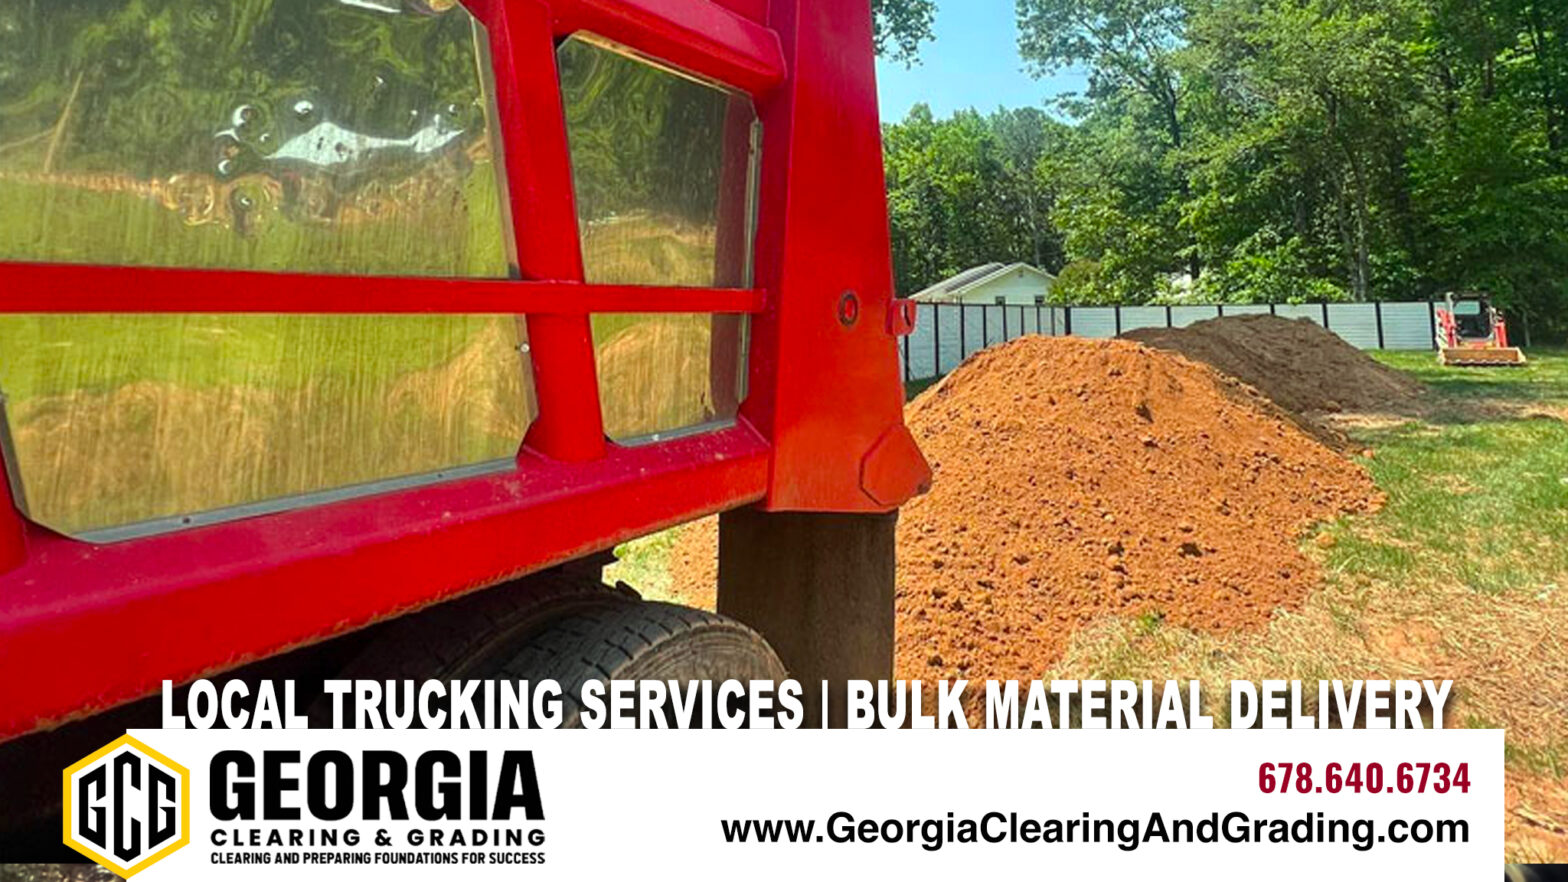 Local Trucking Services | Bulk Material Delivery